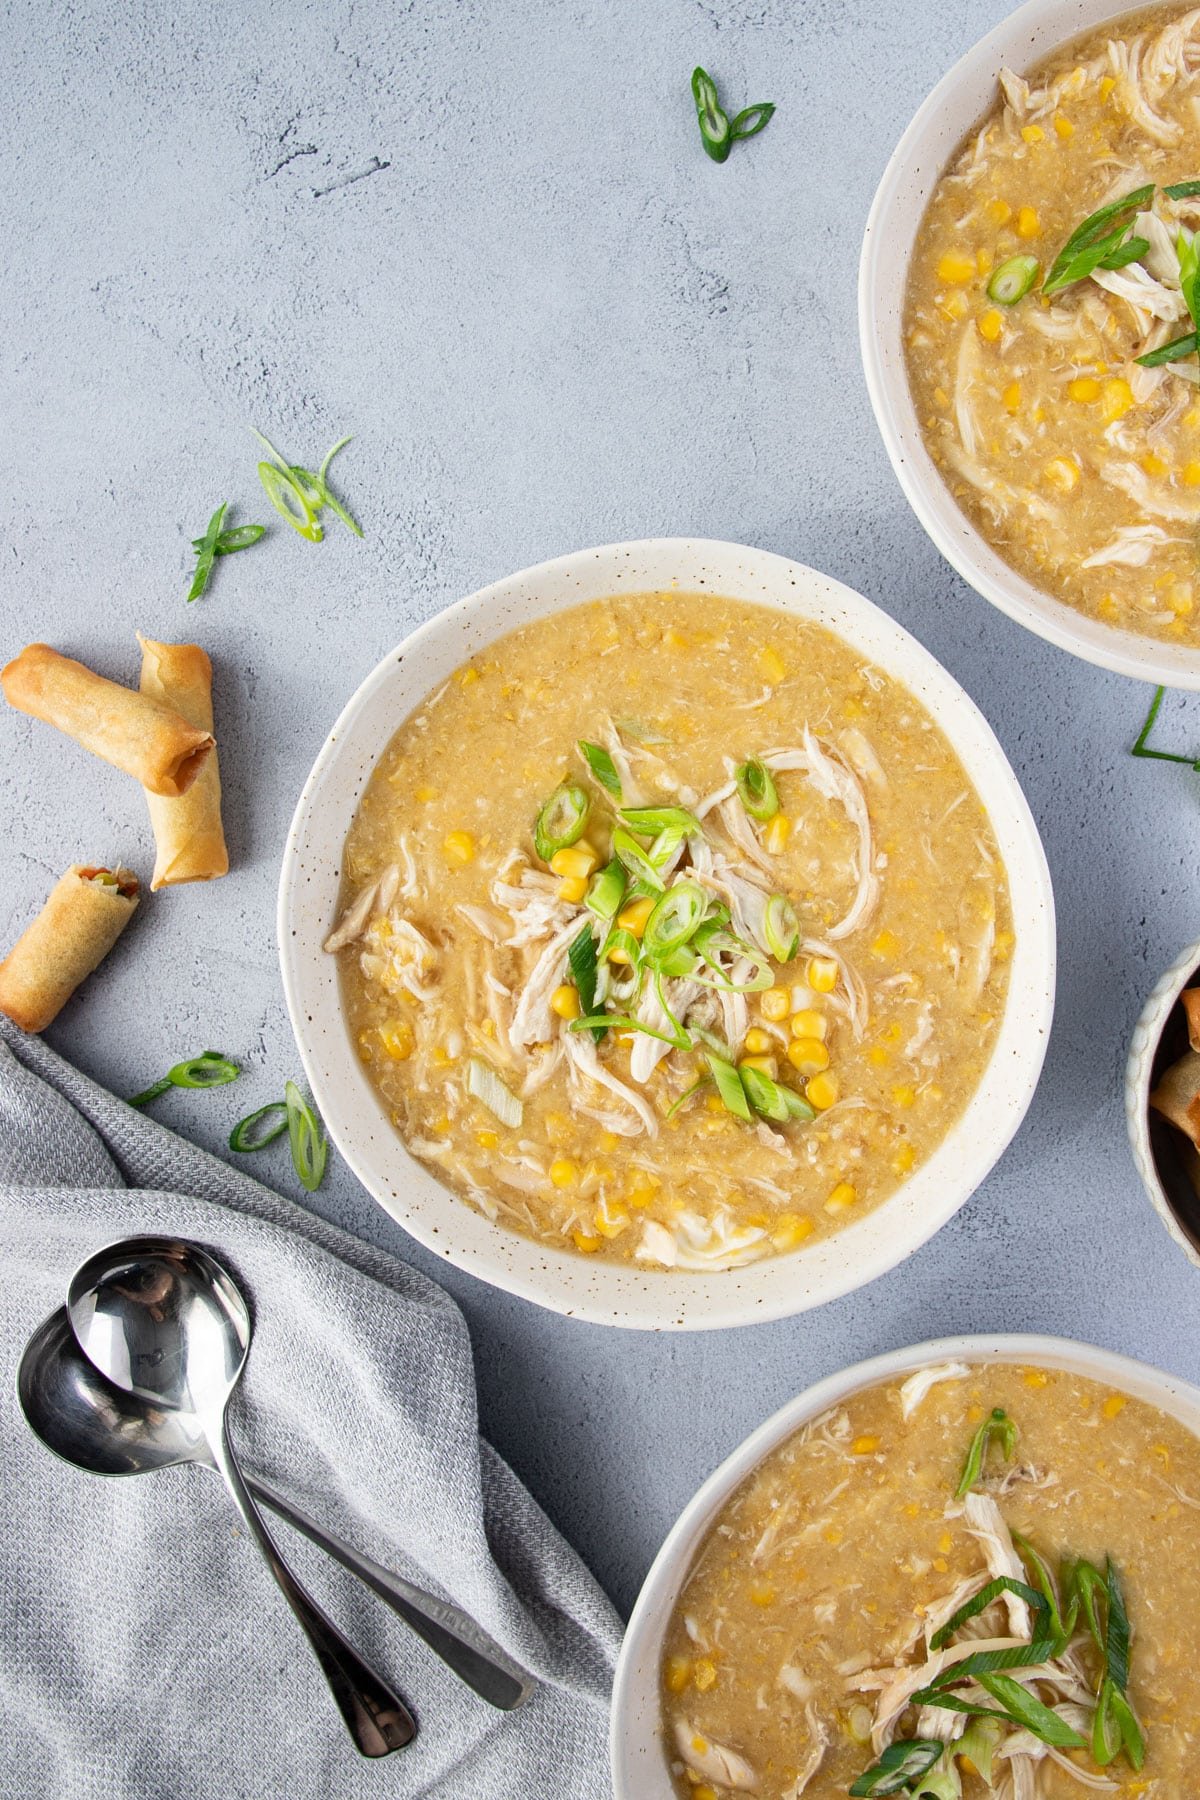 https://www.thecookingcollective.com.au/wp-content/uploads/2022/08/chicken-and-corn-soup.jpg